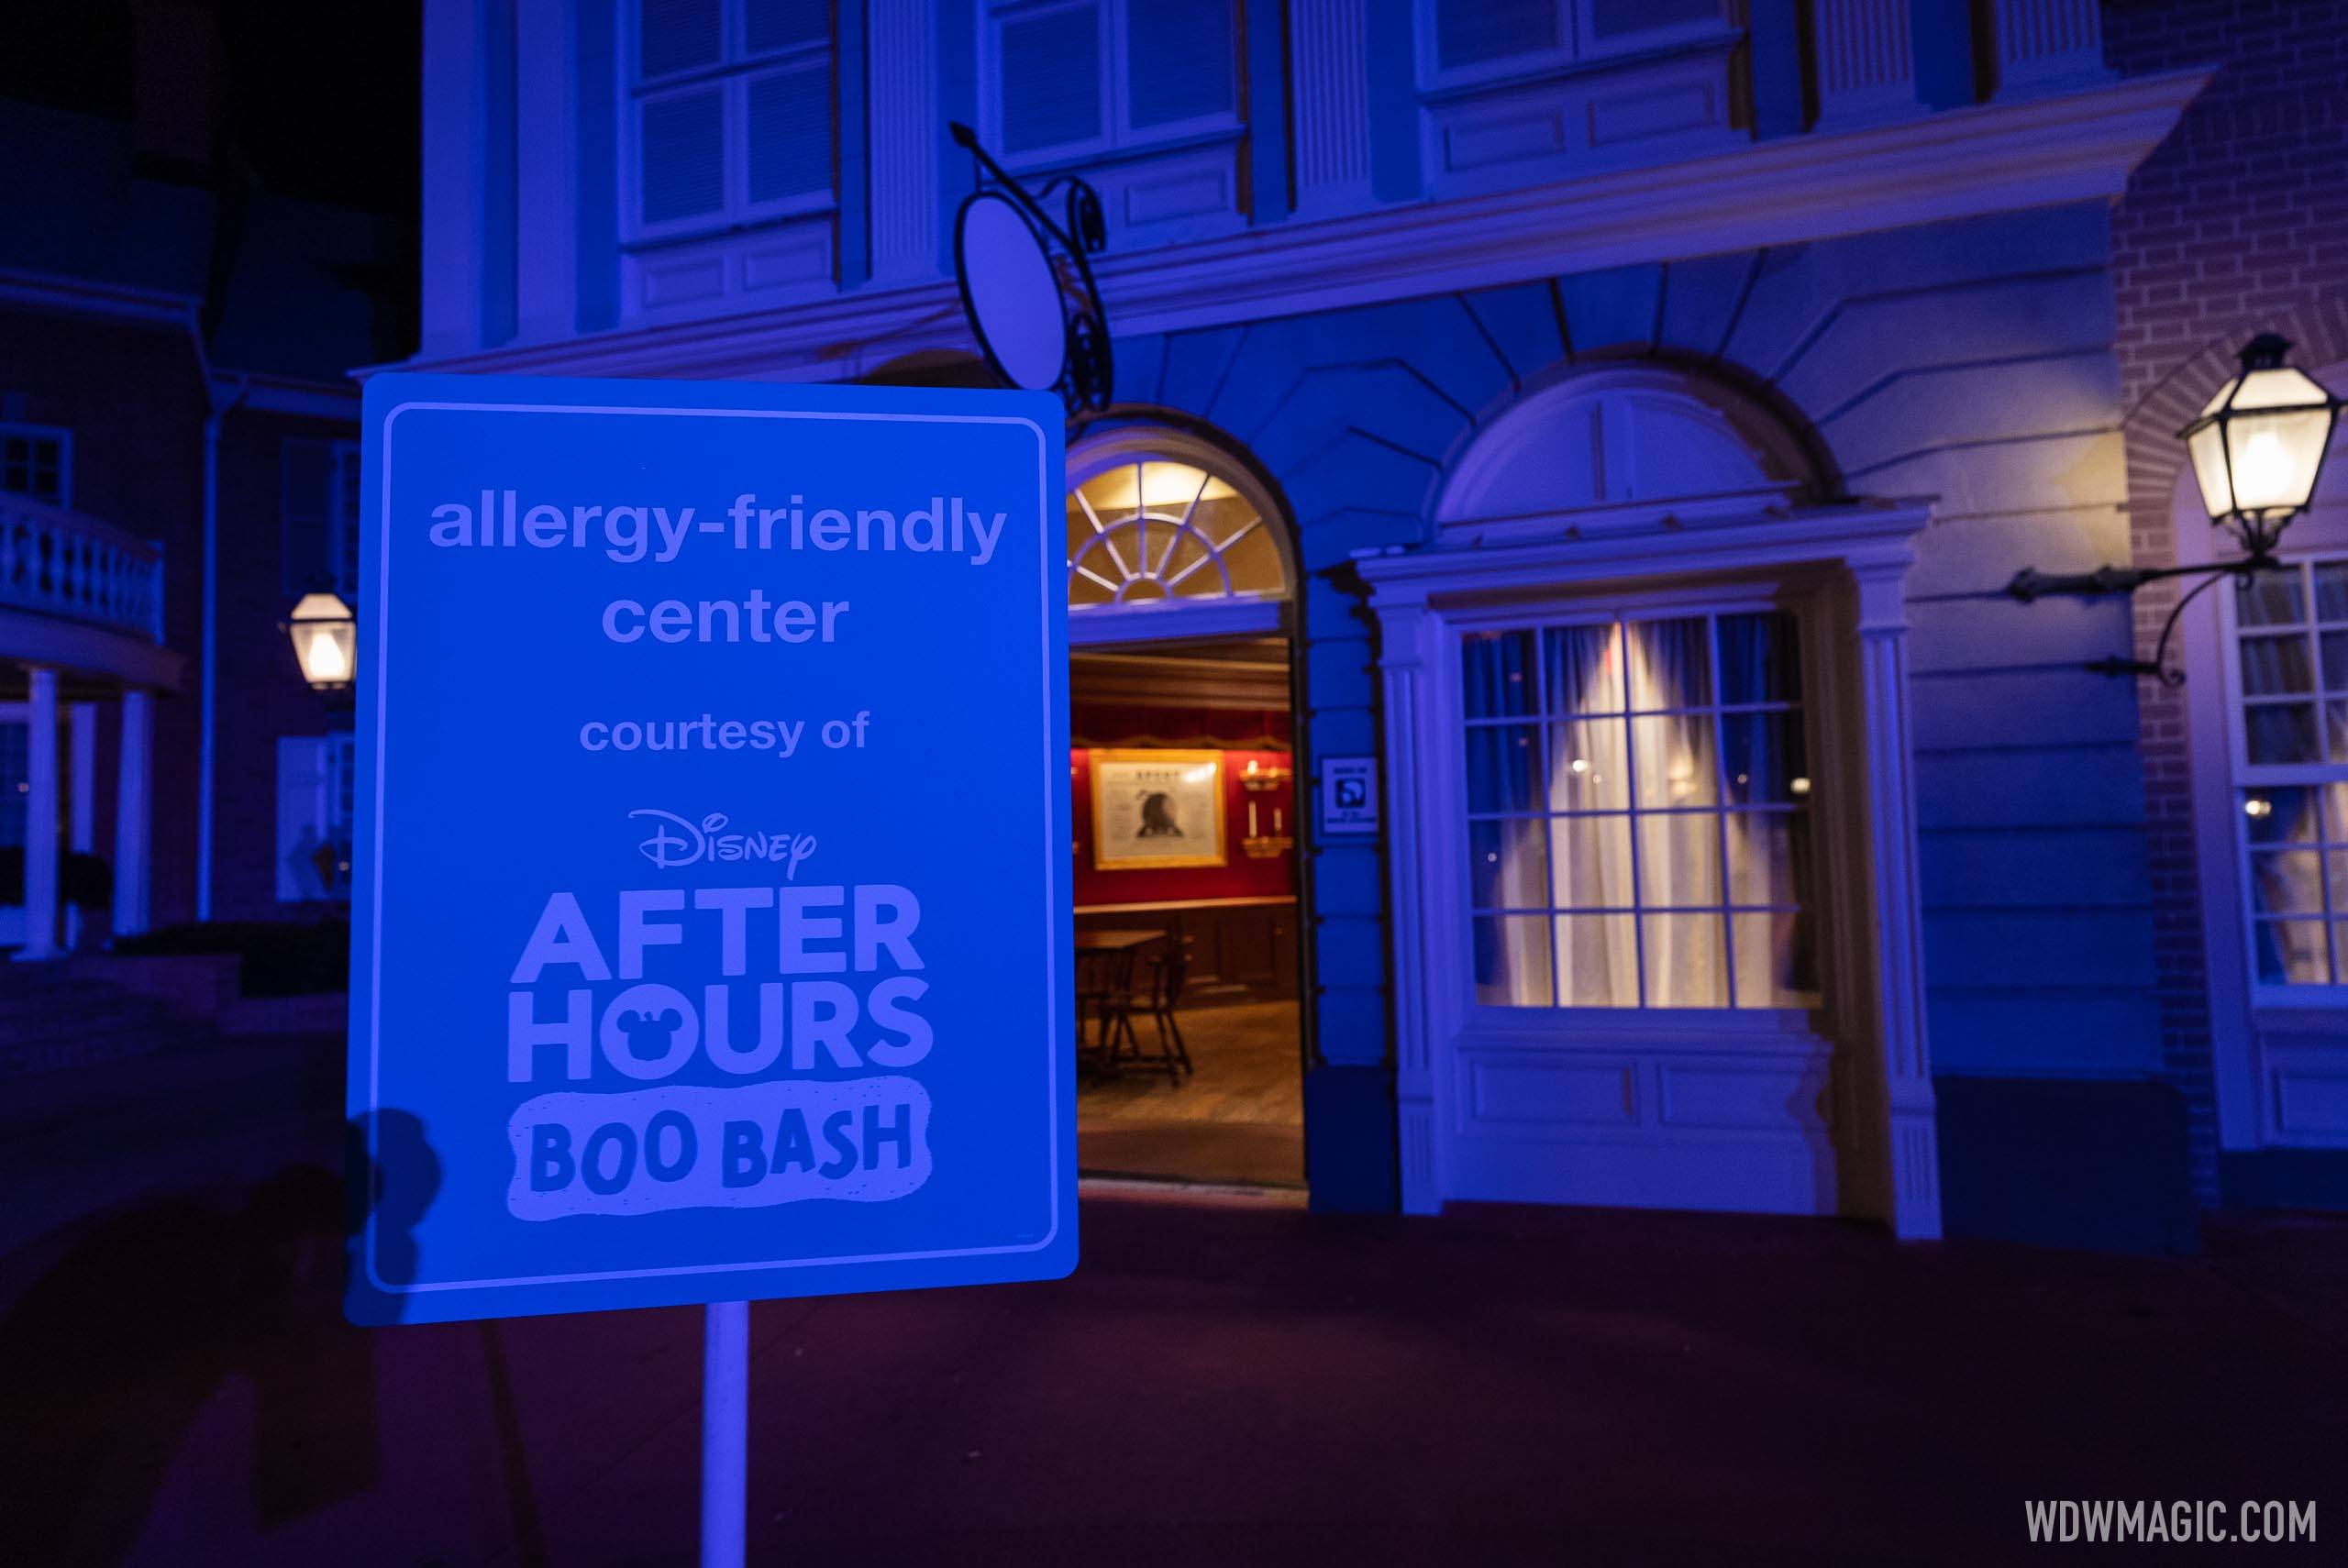 Allergy friendly treats are available in Liberty Square